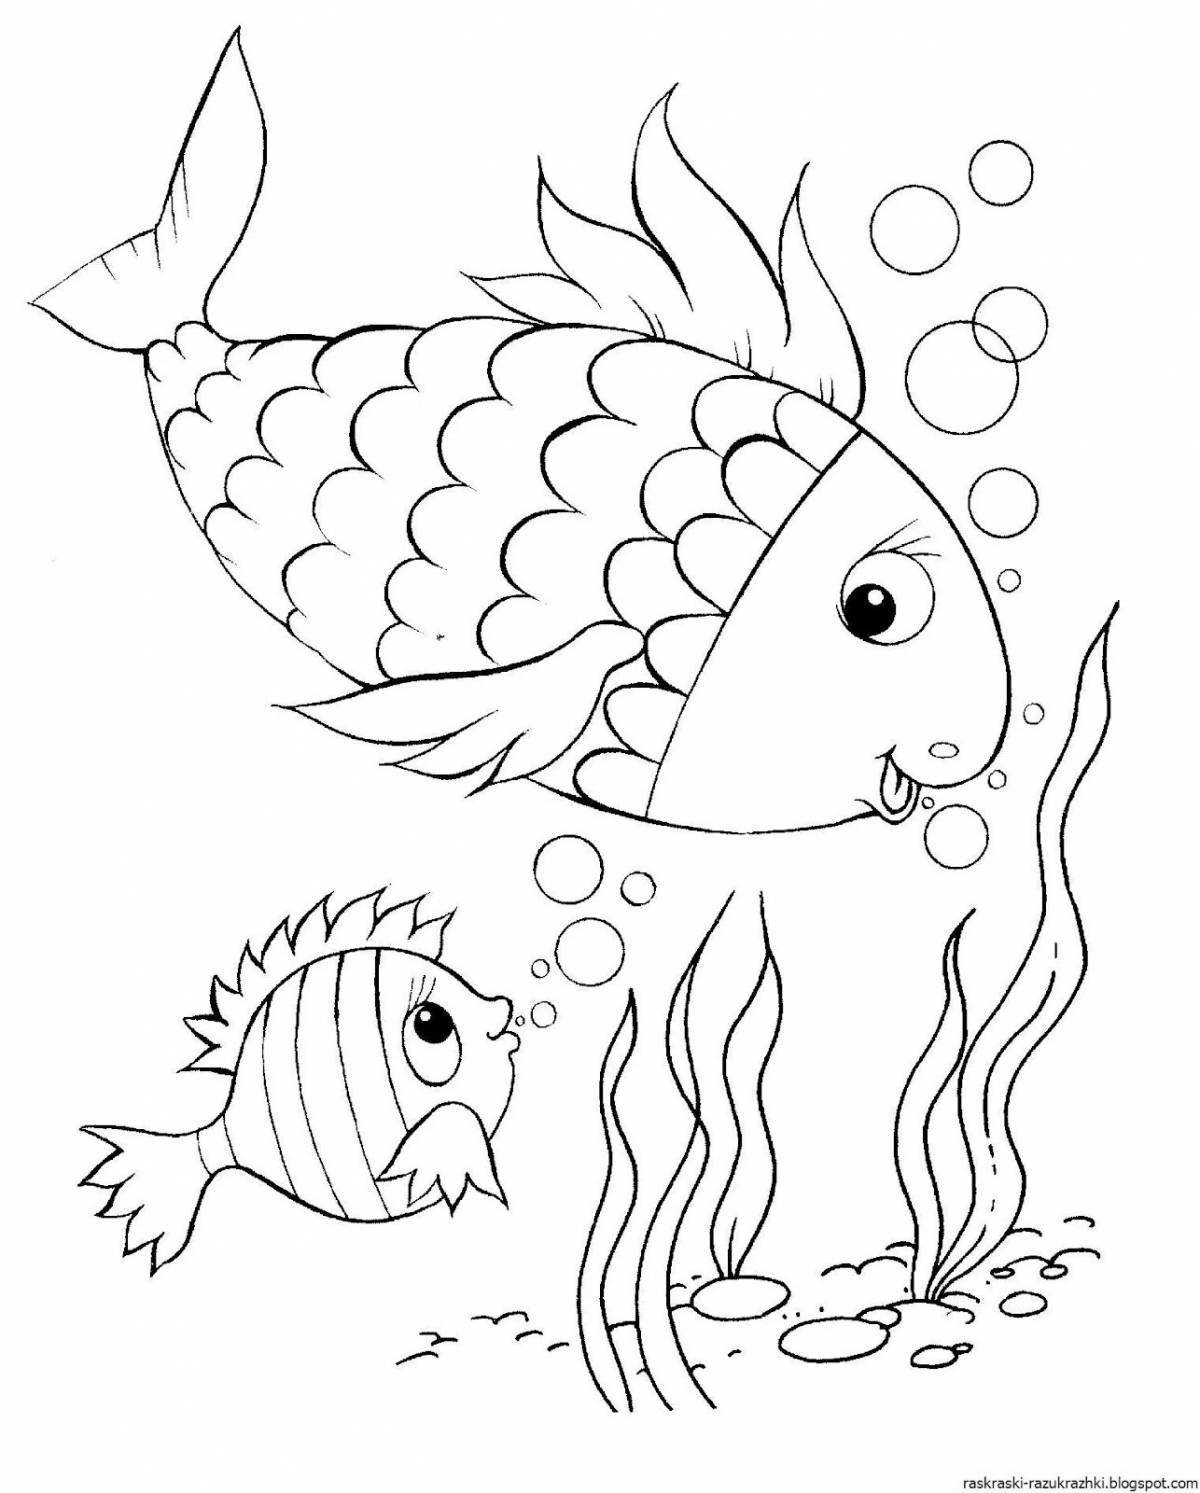 Amazing goldfish coloring pages for little ones